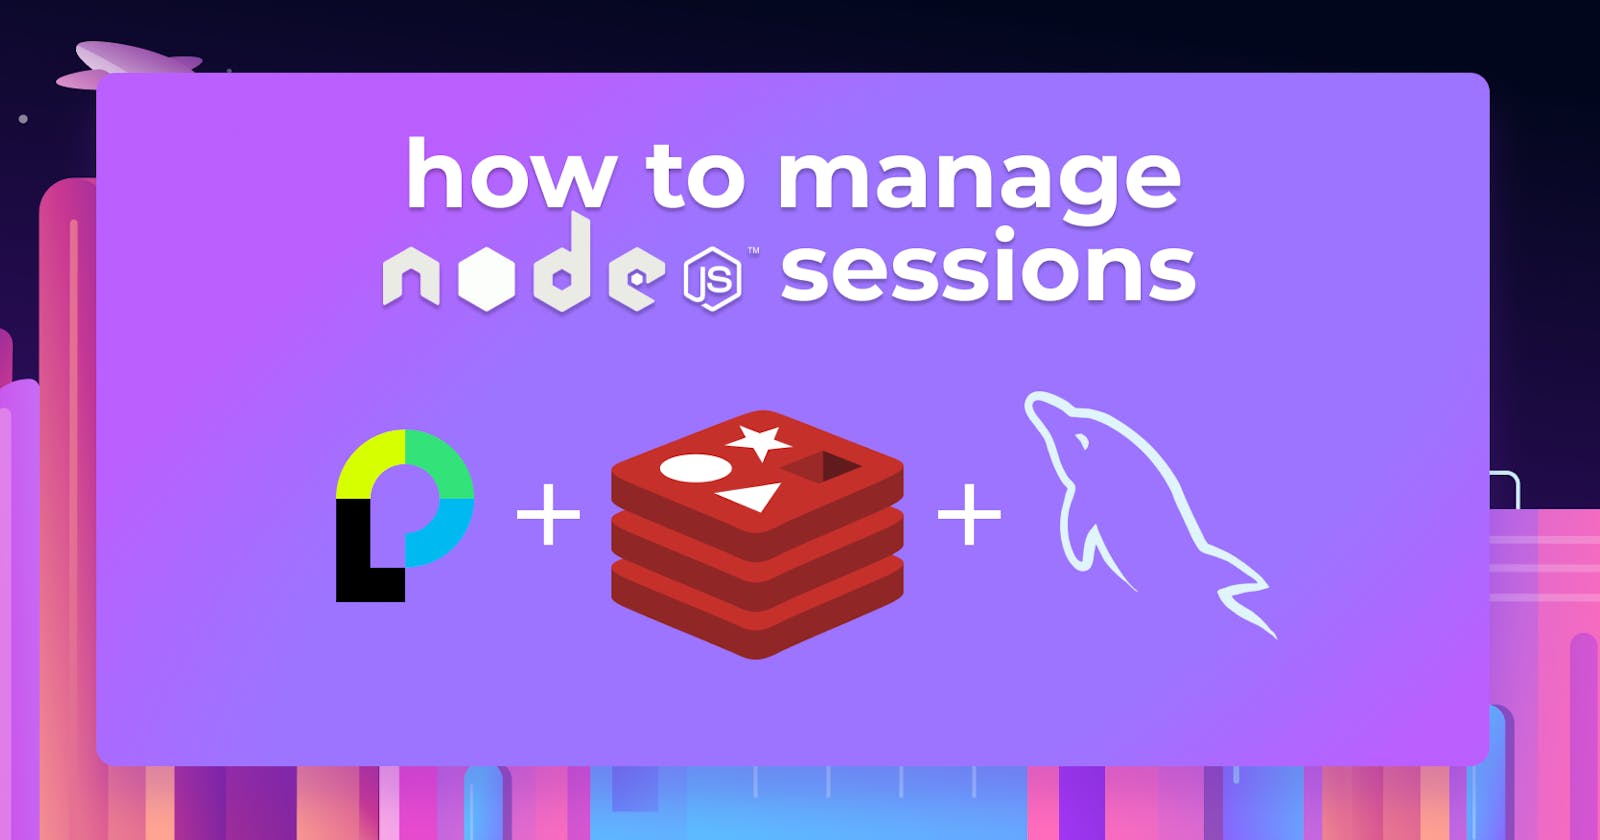 How to manage sessions in Node.js using Passport, Redis, and MySQL